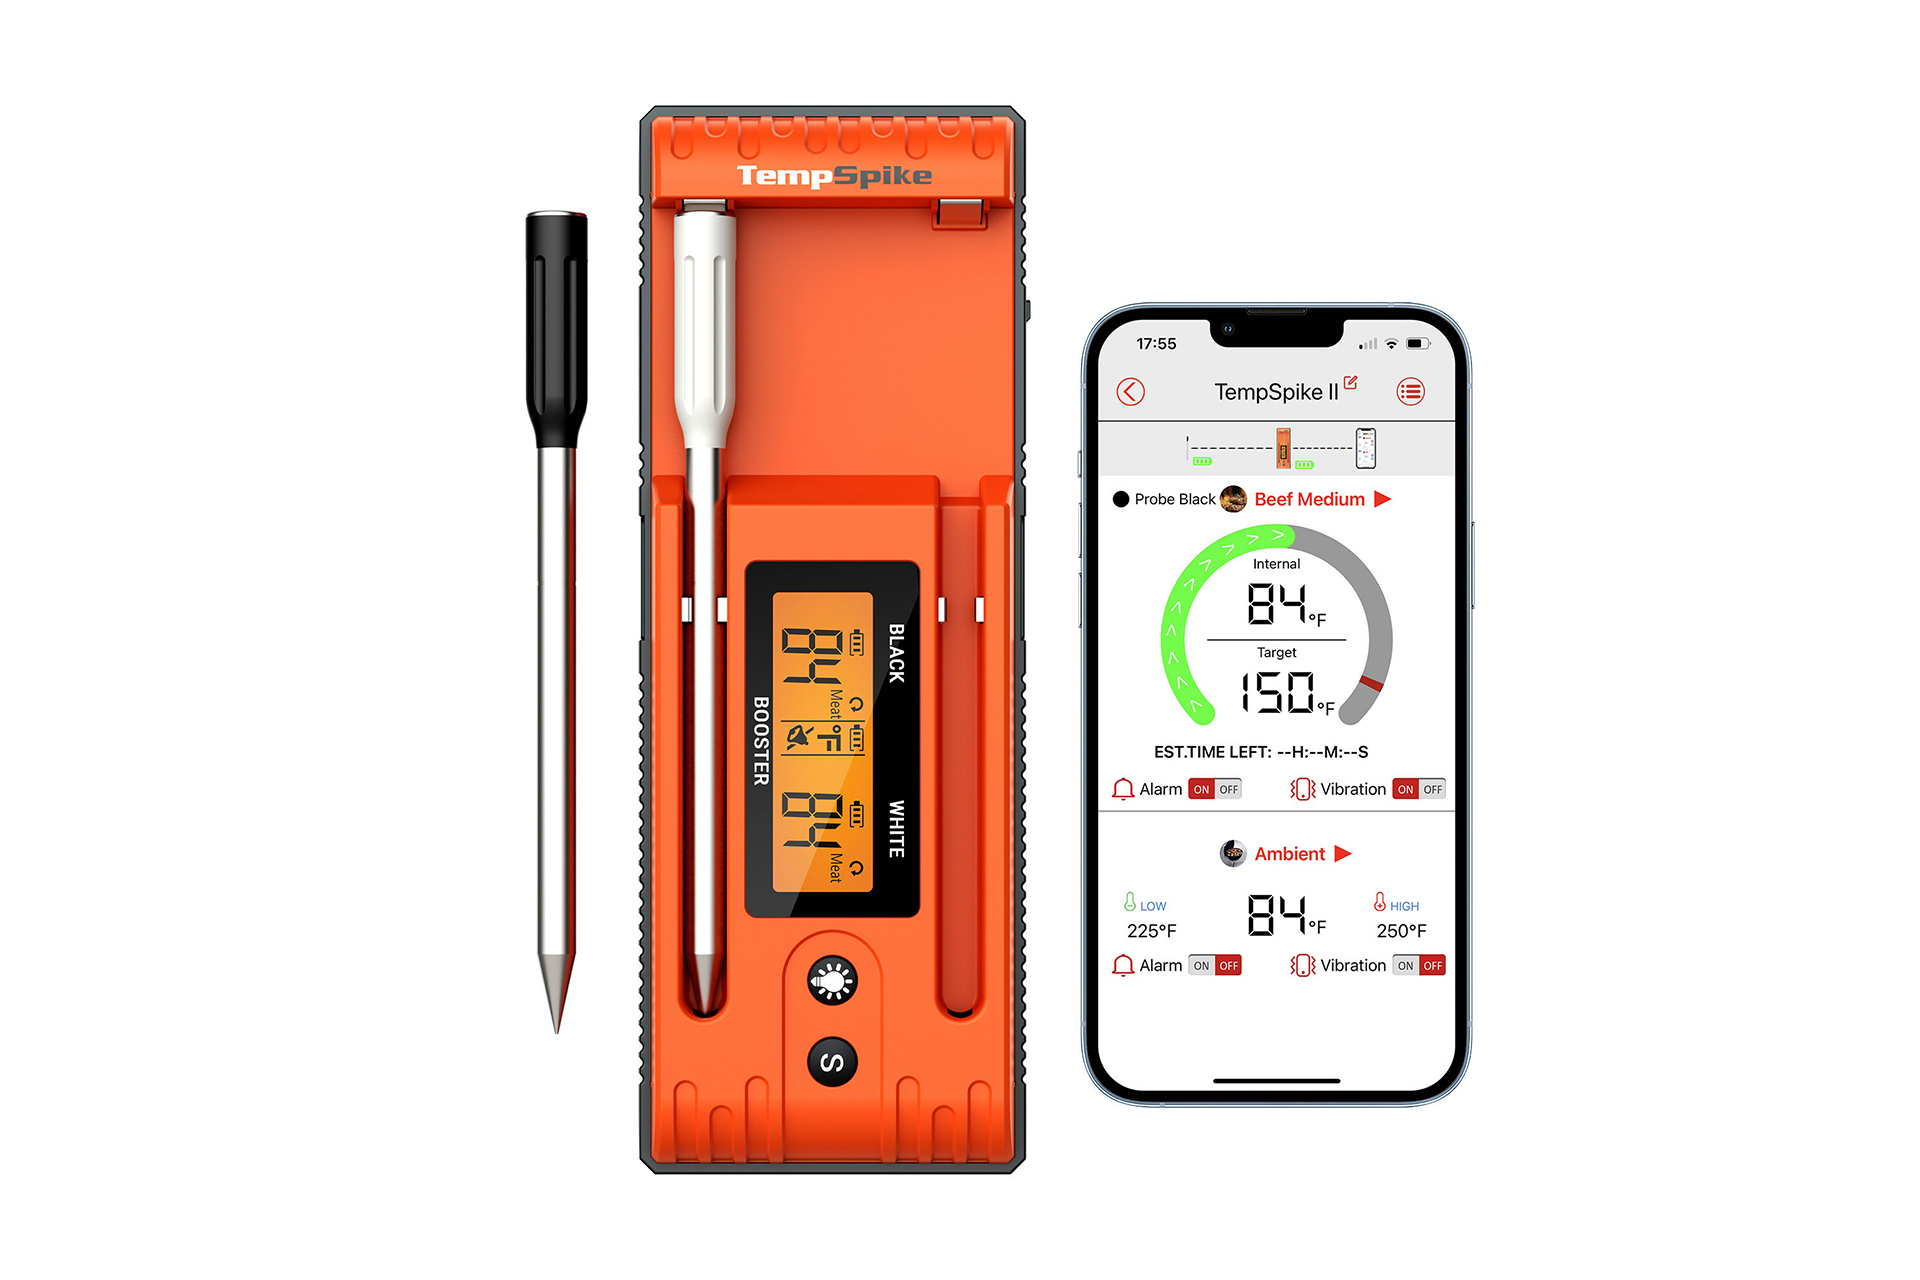 ThermoPro launches smart dual probe meat thermometer with